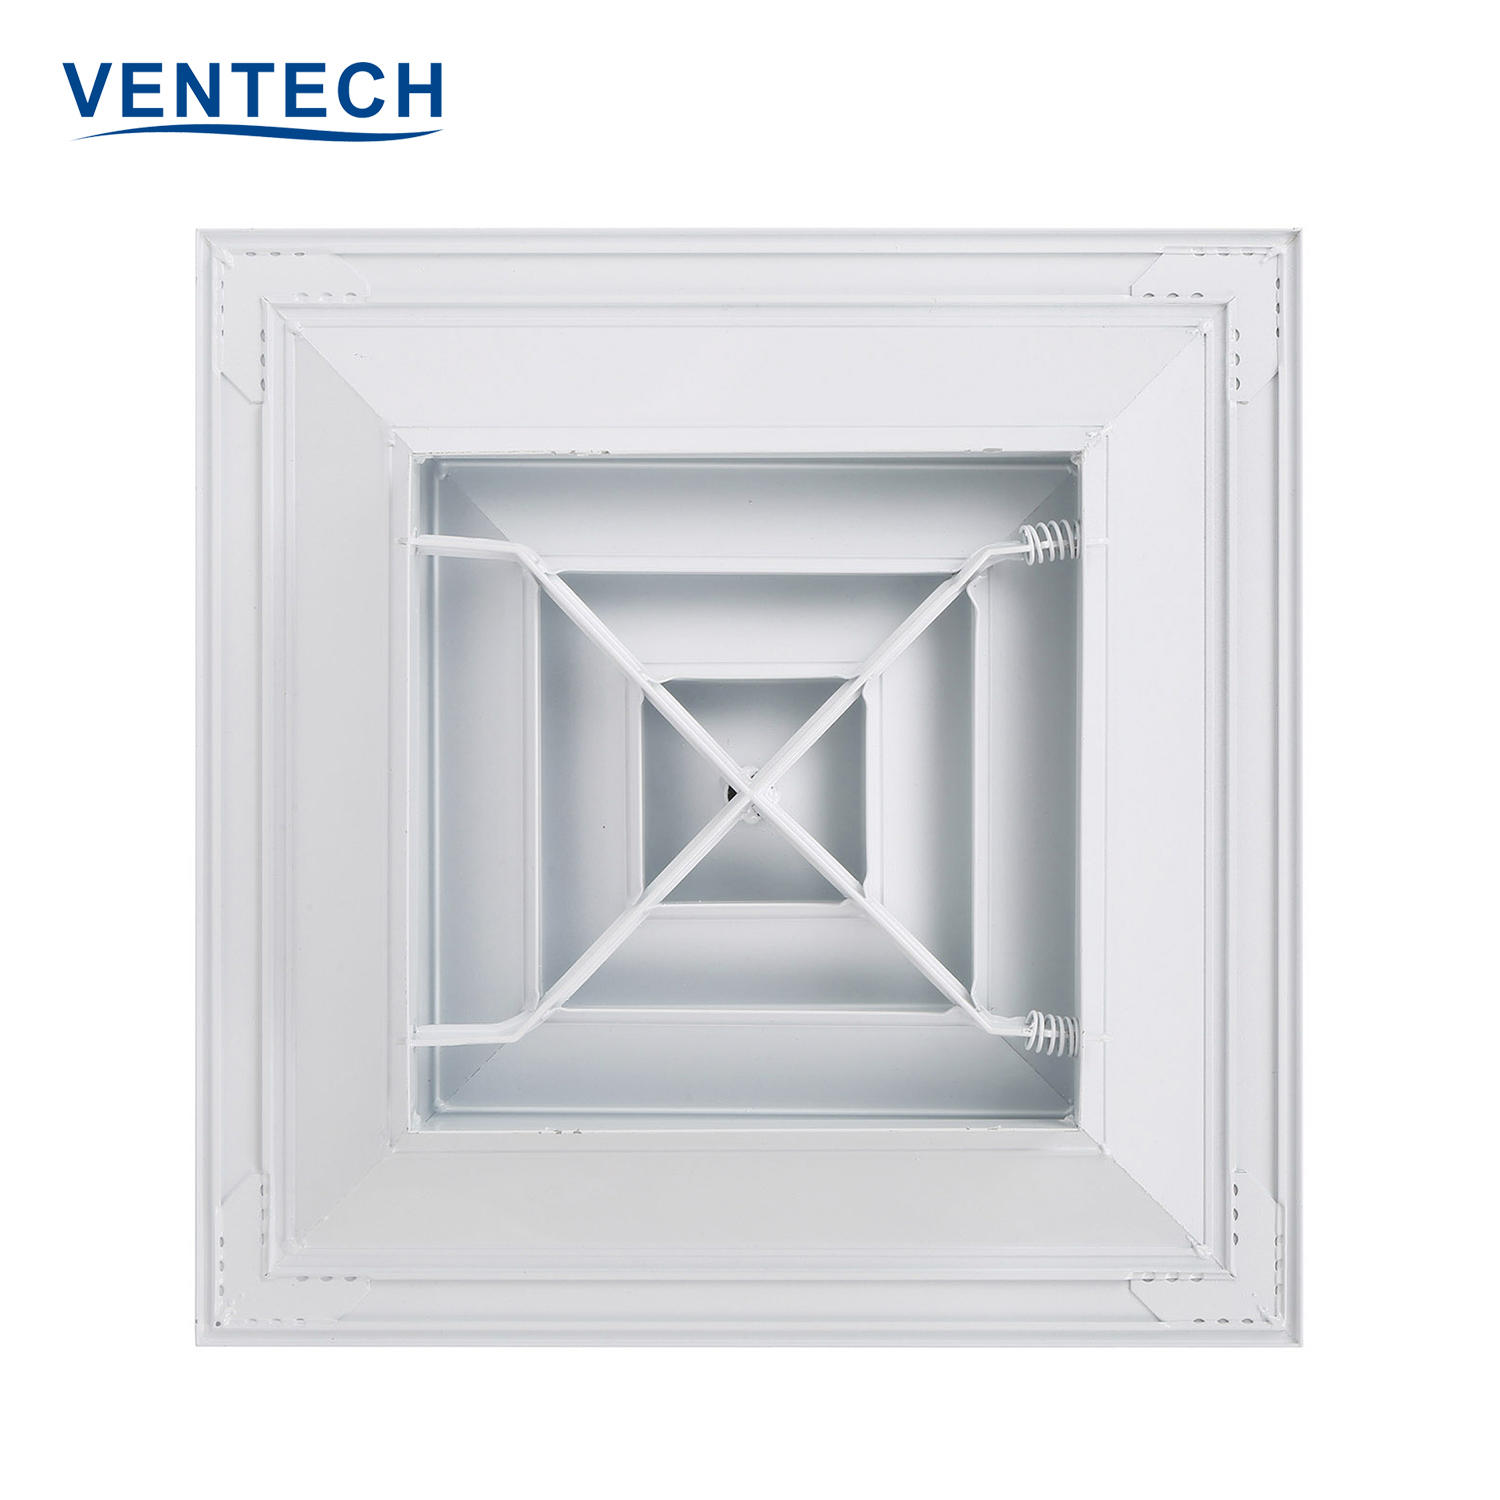 Hvac VENTECH Aluminum Ceiling Havc 4-Way Supply Air Duct Conditioning Square Ac Ceiling Air Diffusers